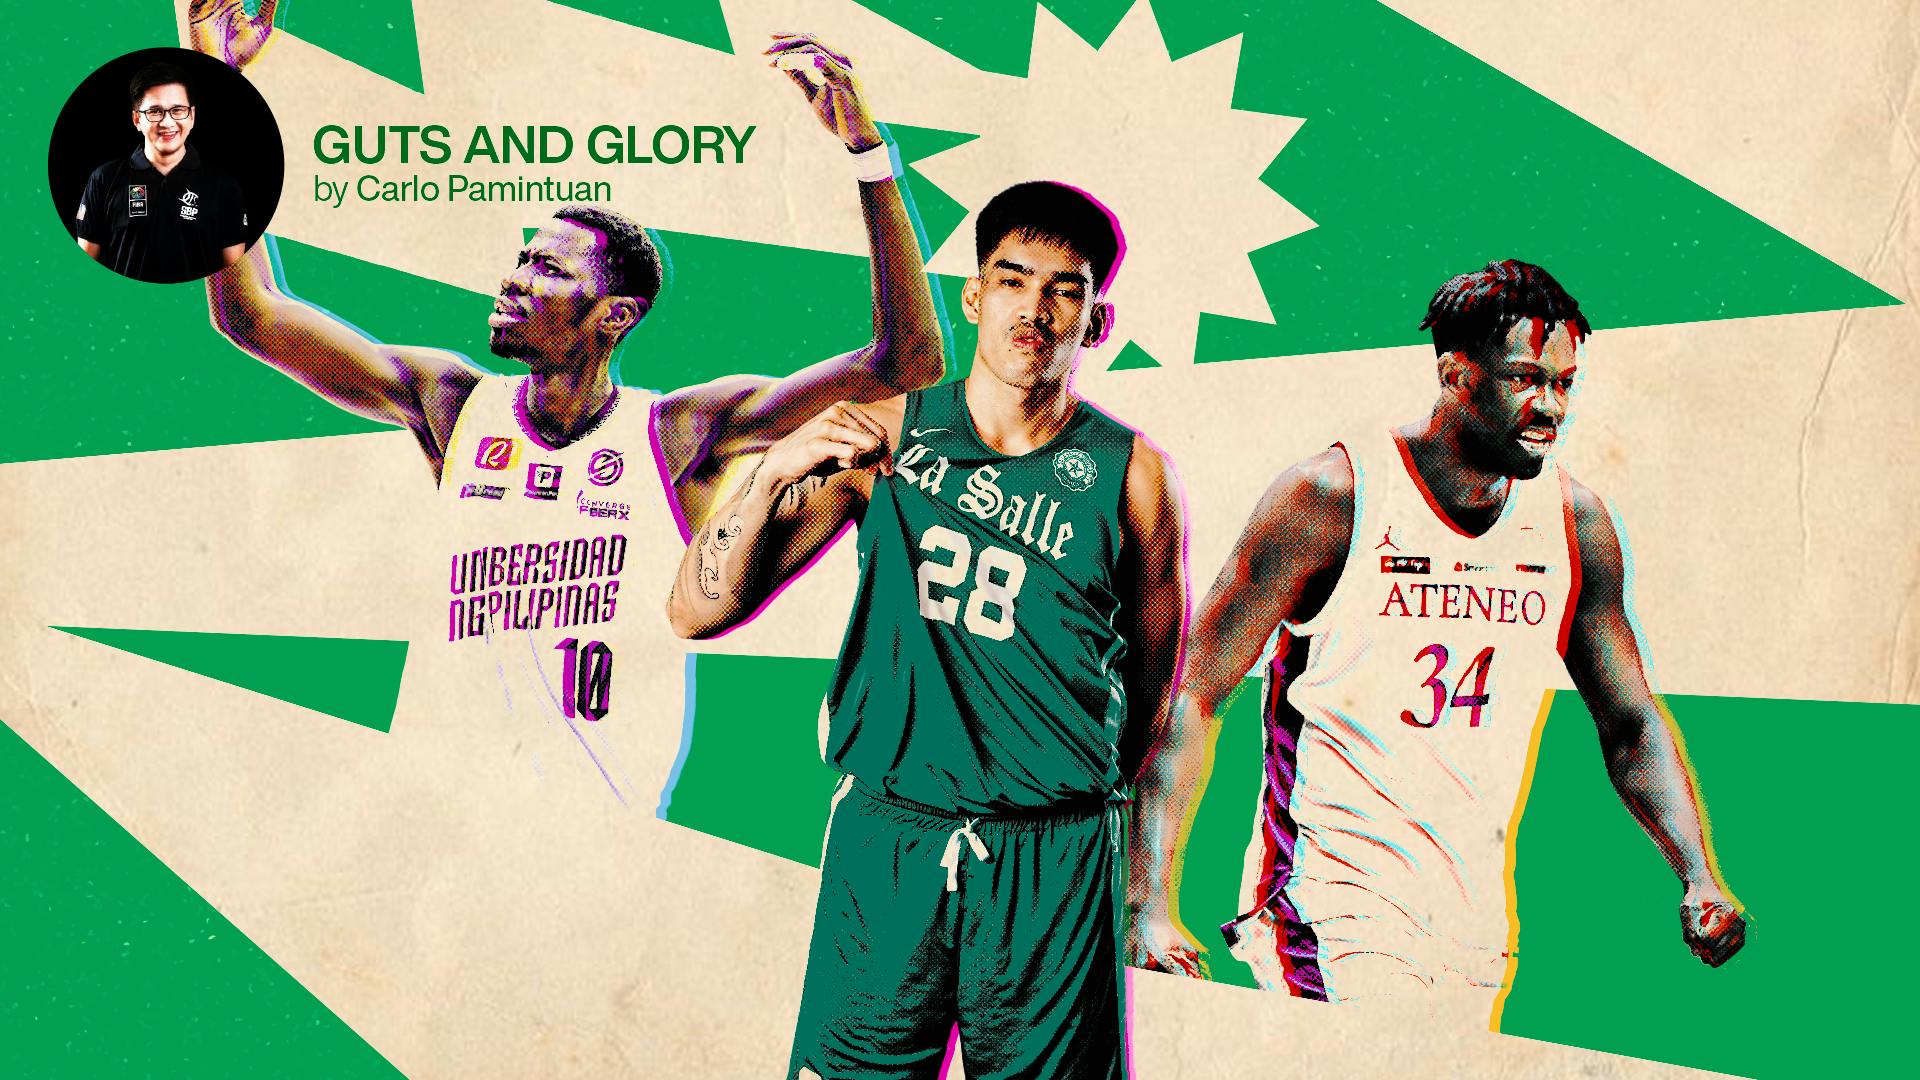 GUTS AND GLORY | Should UAAP reserve MVP award for local players only?